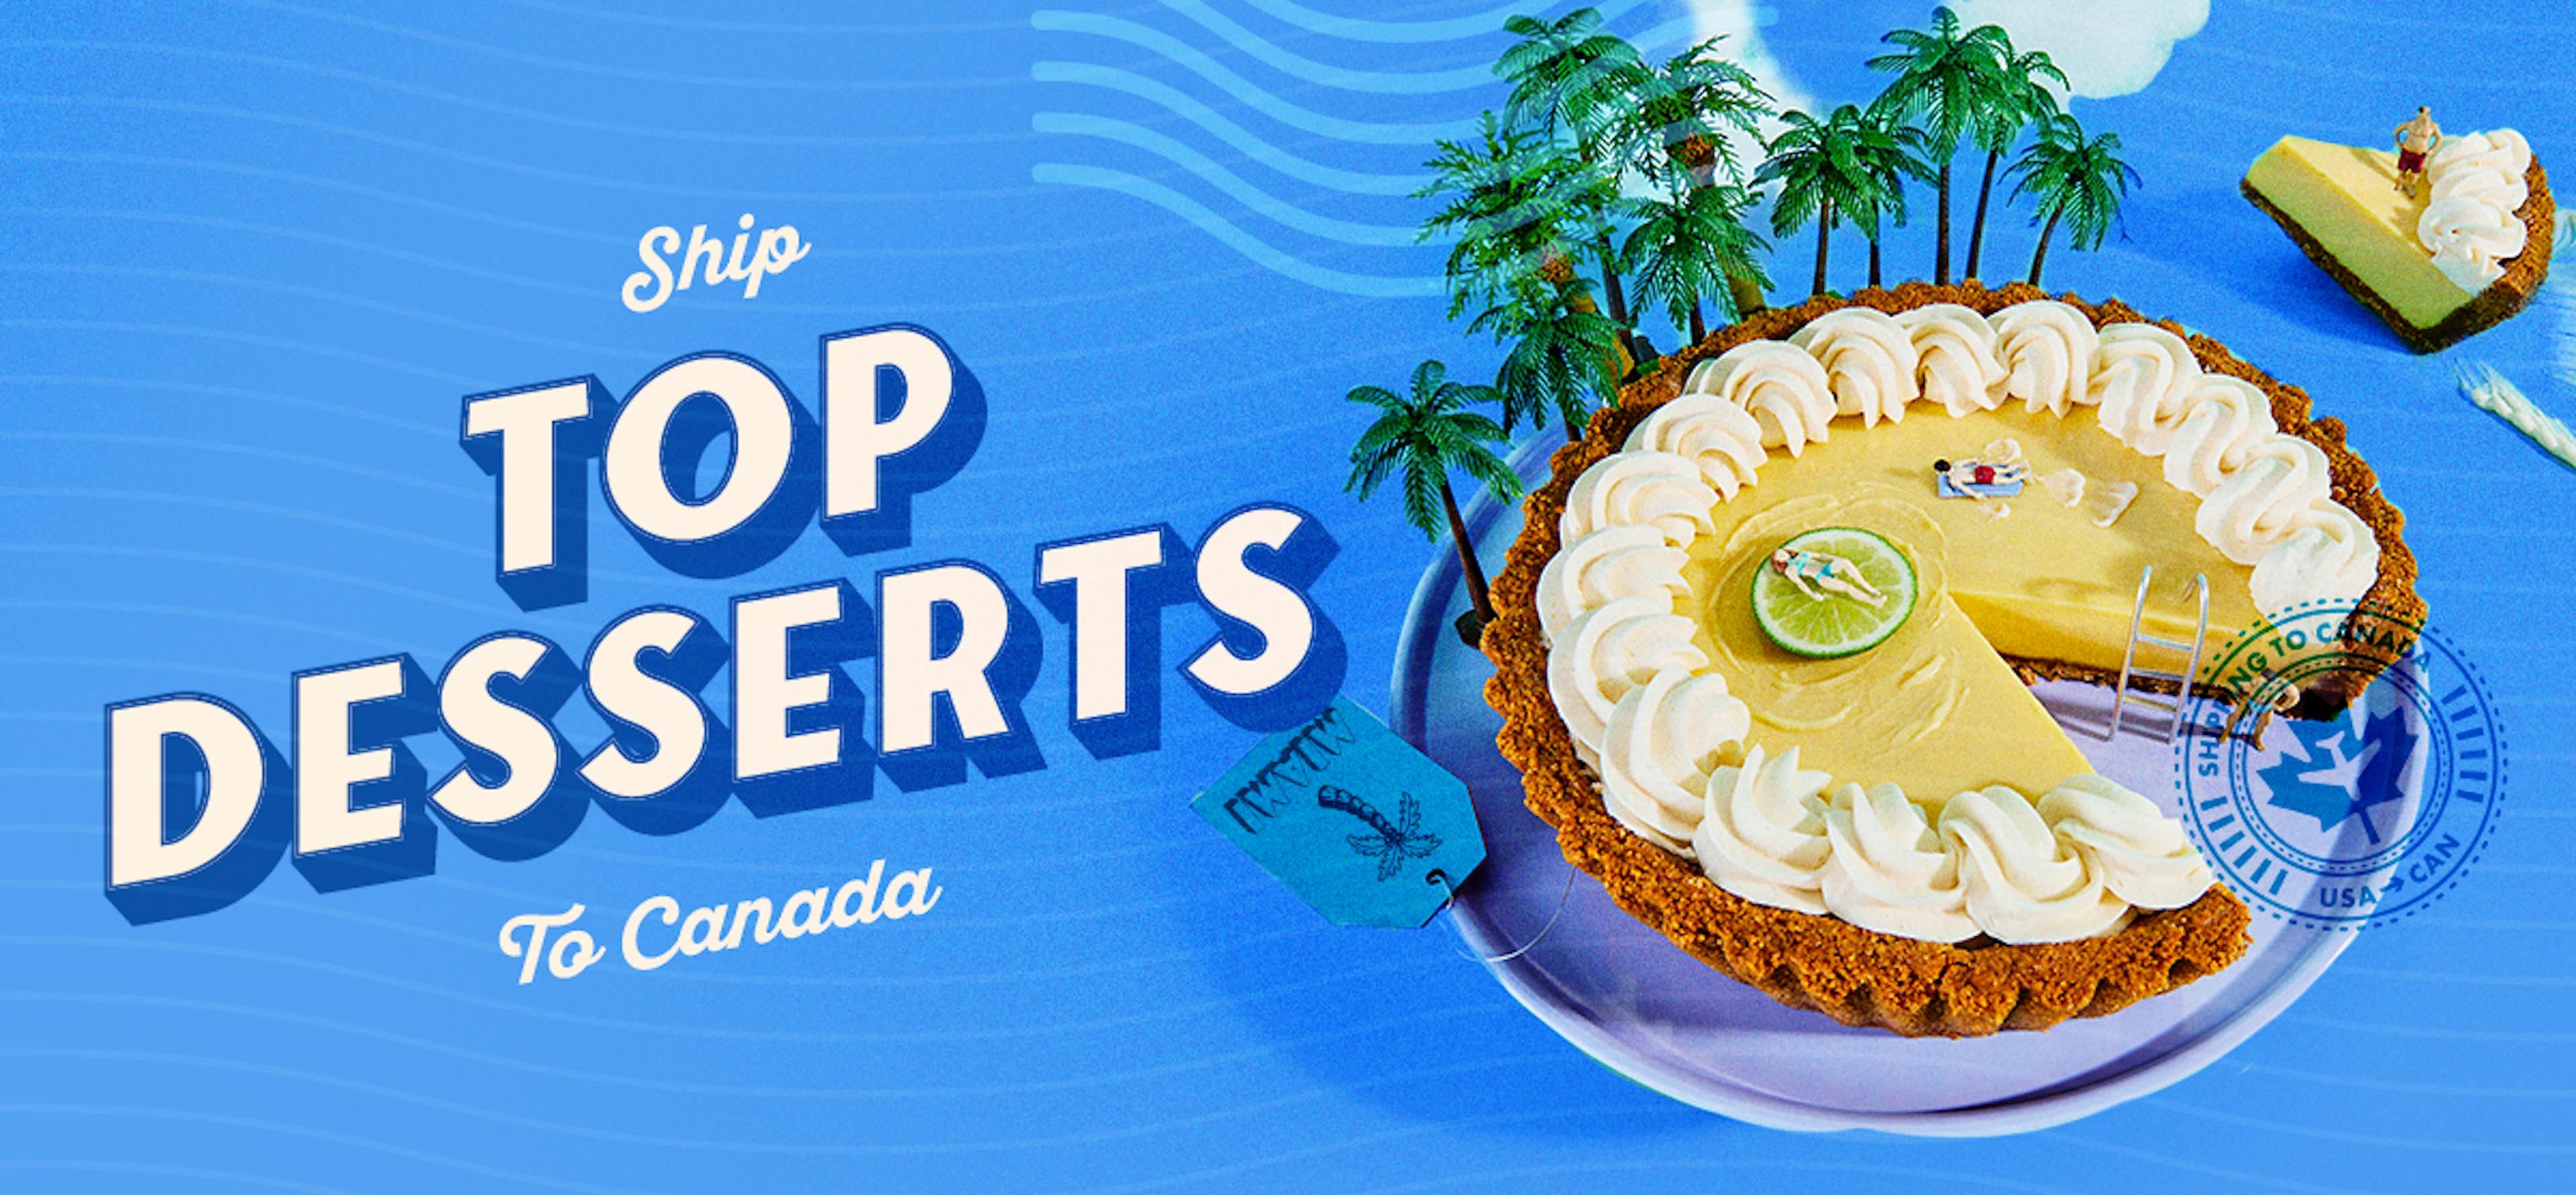 Top Desserts that Ship to Canada